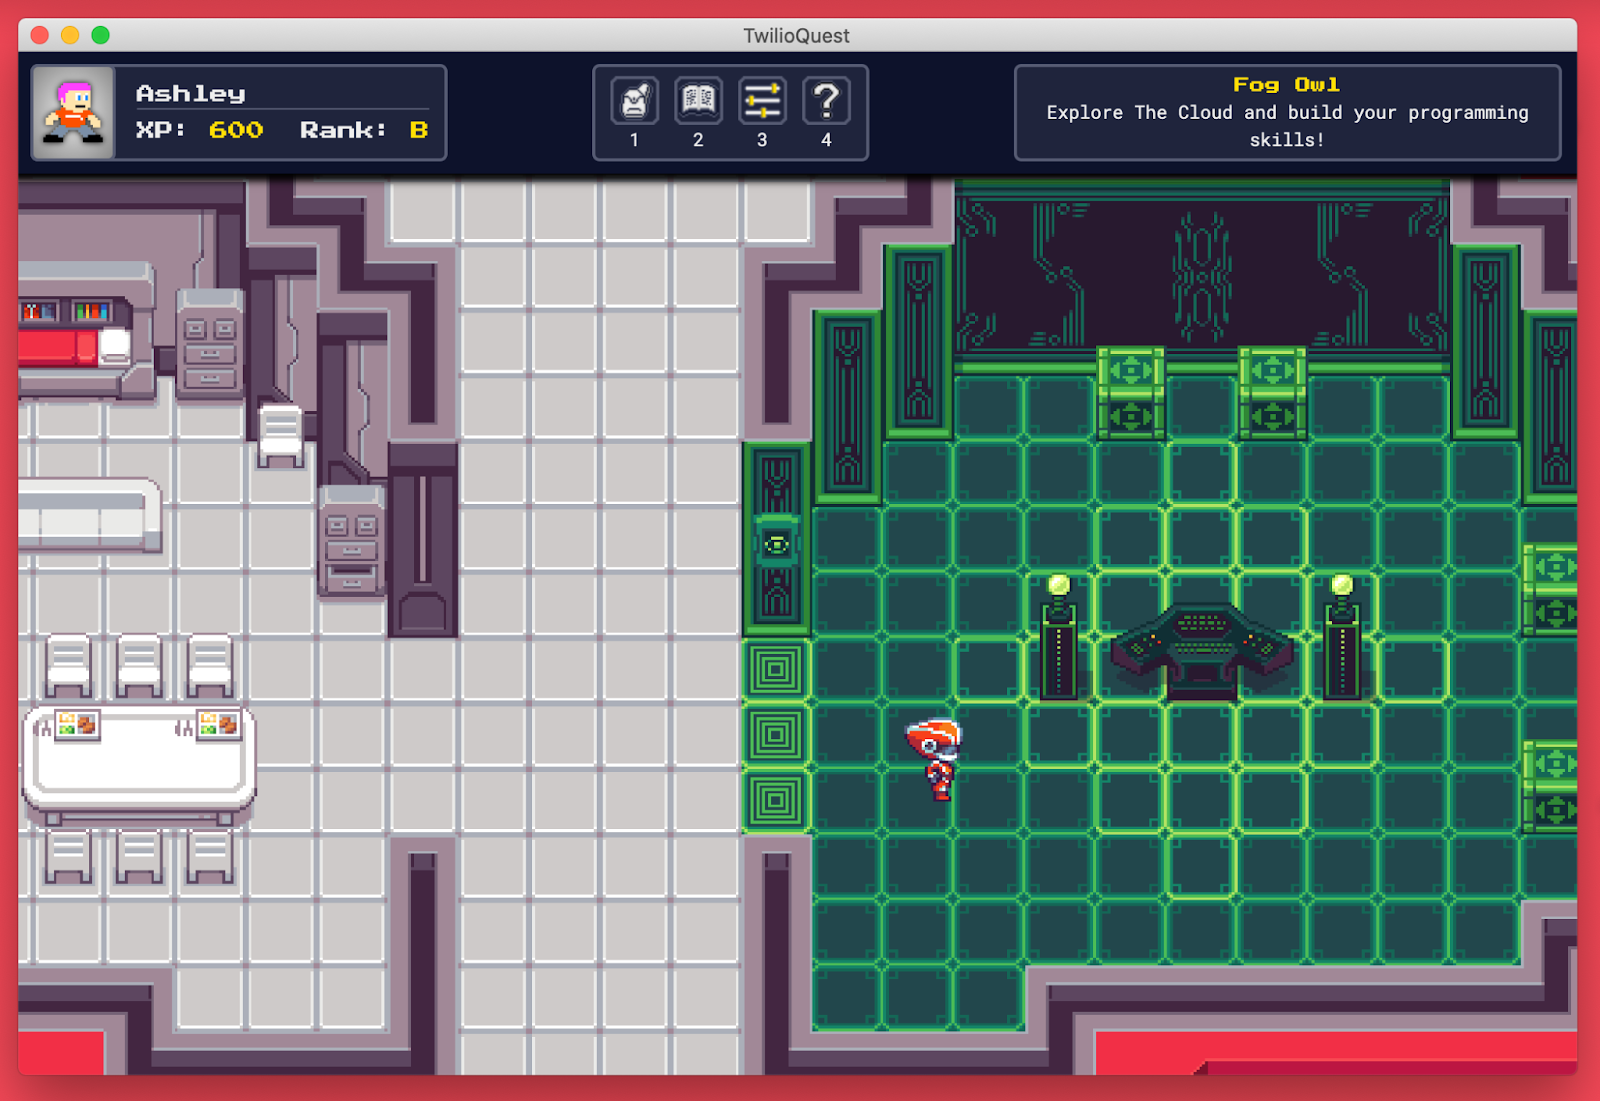 Screenshot of the TwilioQuest game with the avatar positioned inside the training room